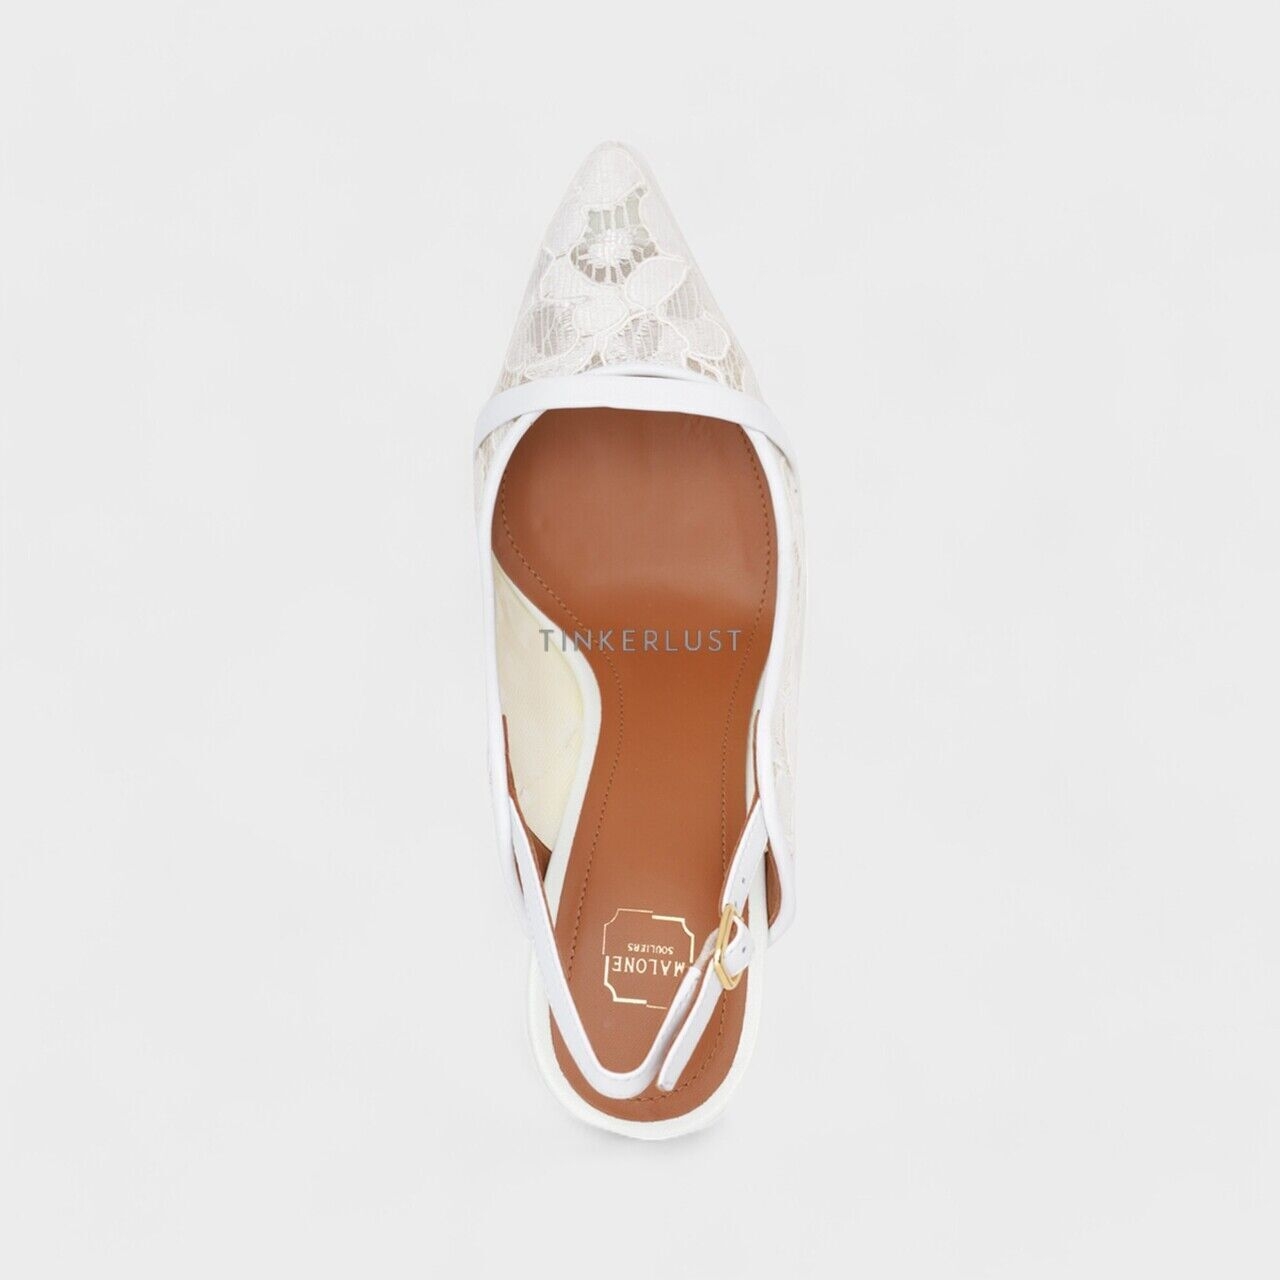 Malone Souliers Marion Lace Bridal Pumps 85mm in White Heels 